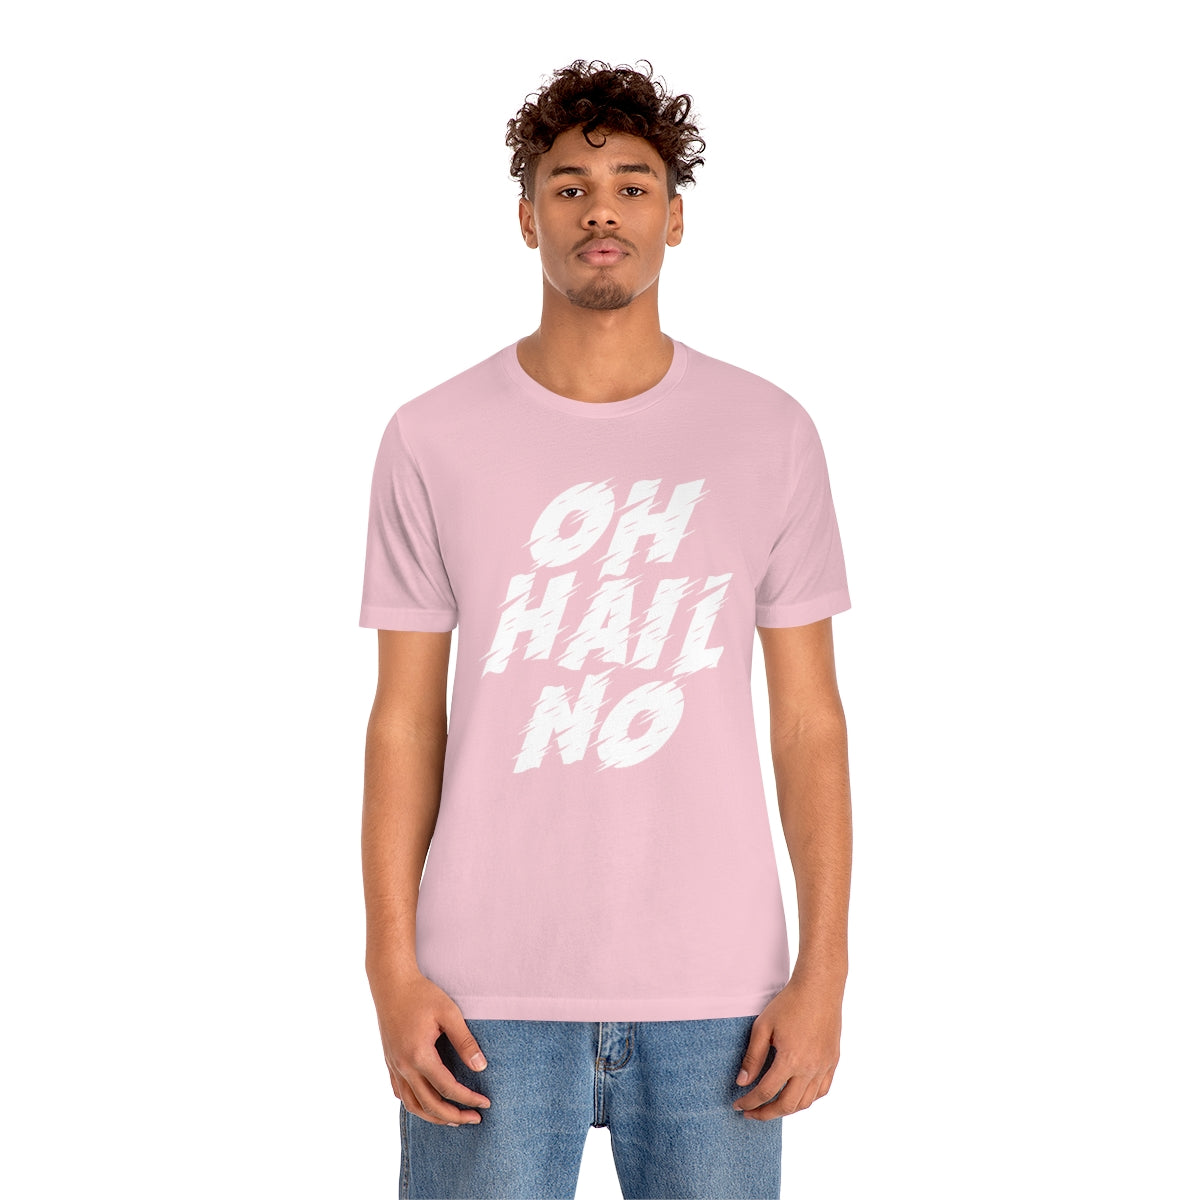 Oh Hail No Tee – Helicity Designs | T-Shirts